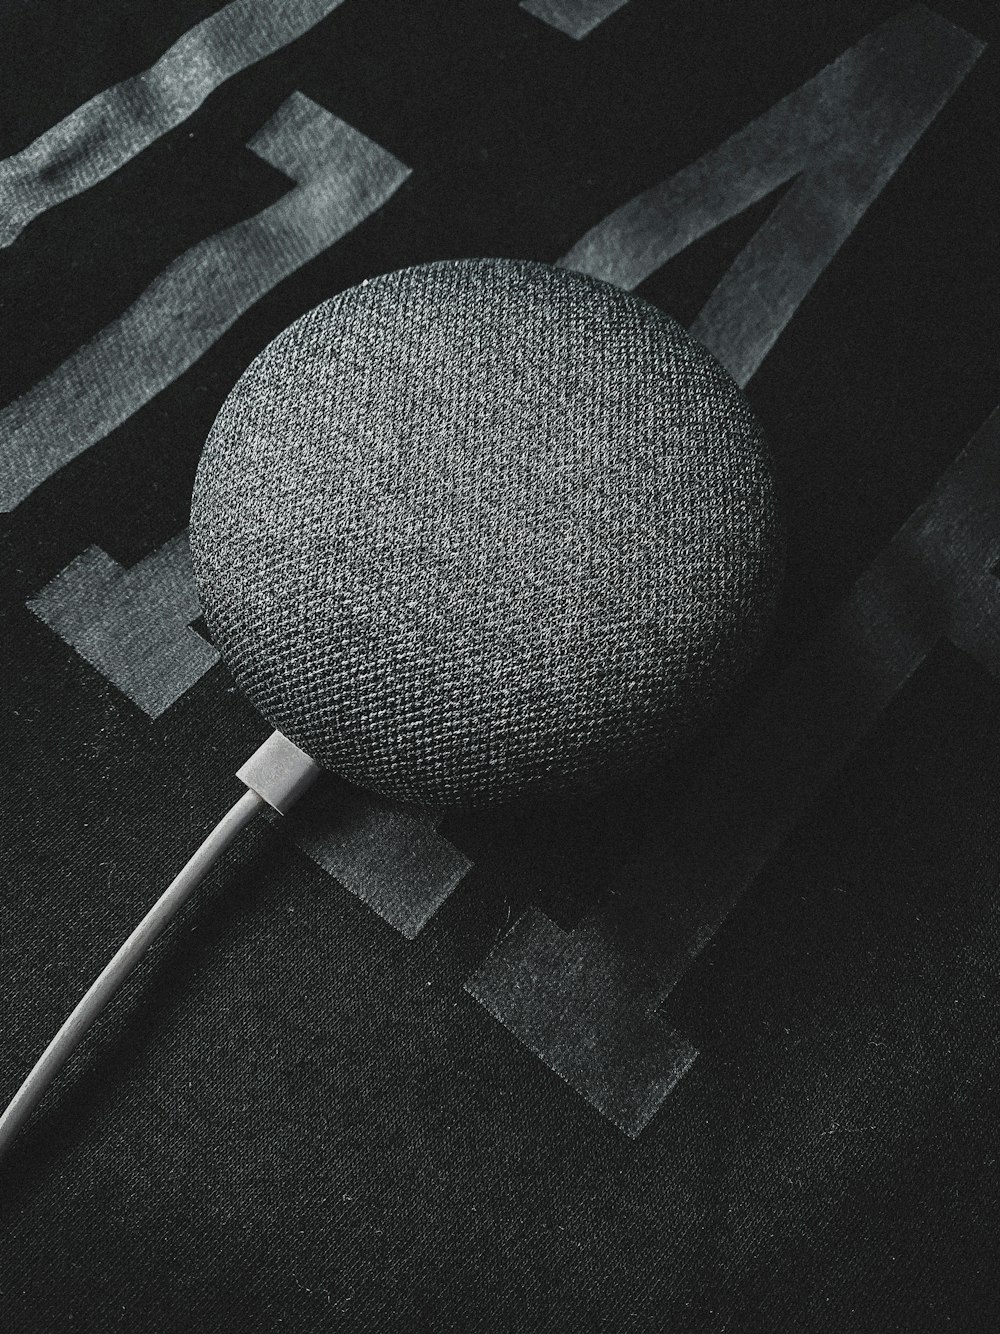 black and gray round textile